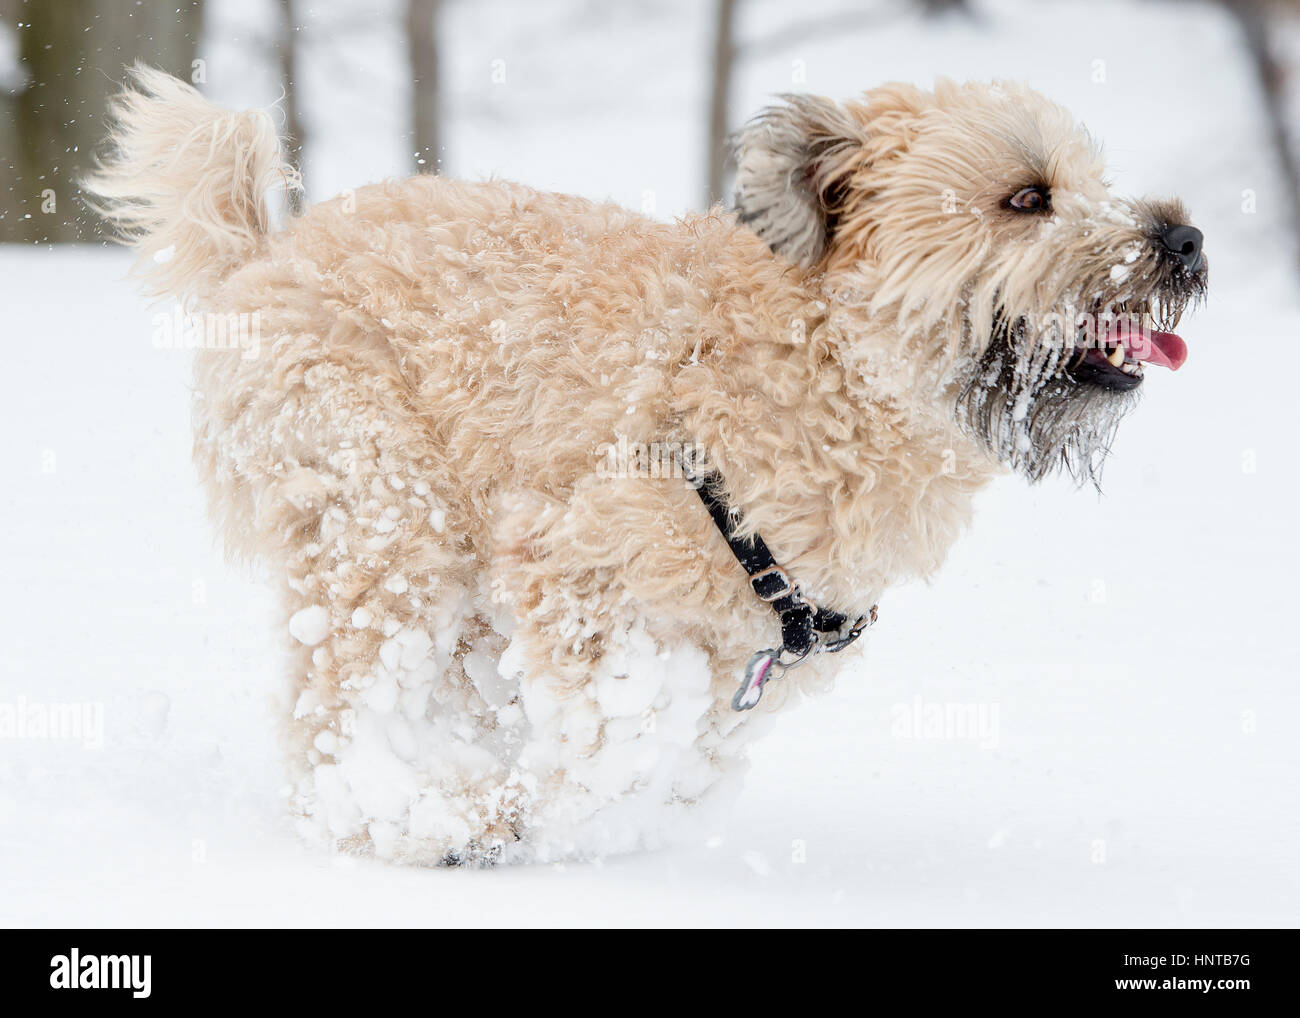 Uncut, untrimmed, unclipped adorable Wheaten Terrier dog running playing leaping posing in snow white background winter fun Stock Photo